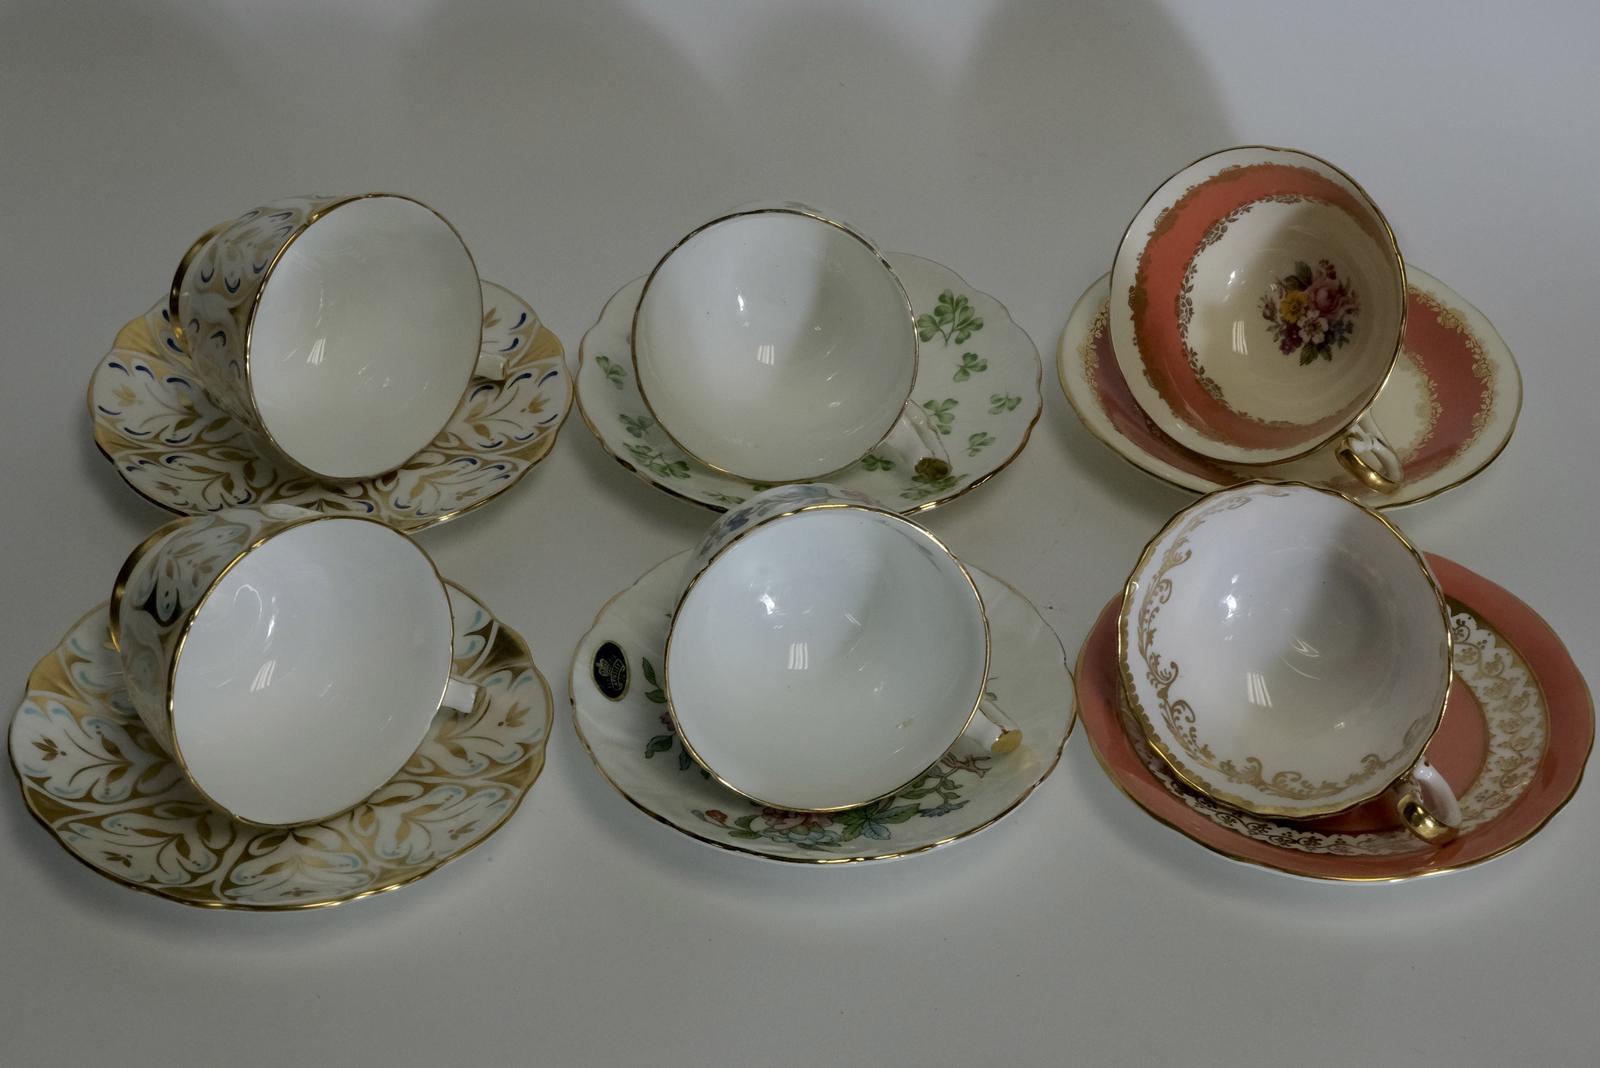 AYNSLEY CUPS AND SAUCERS